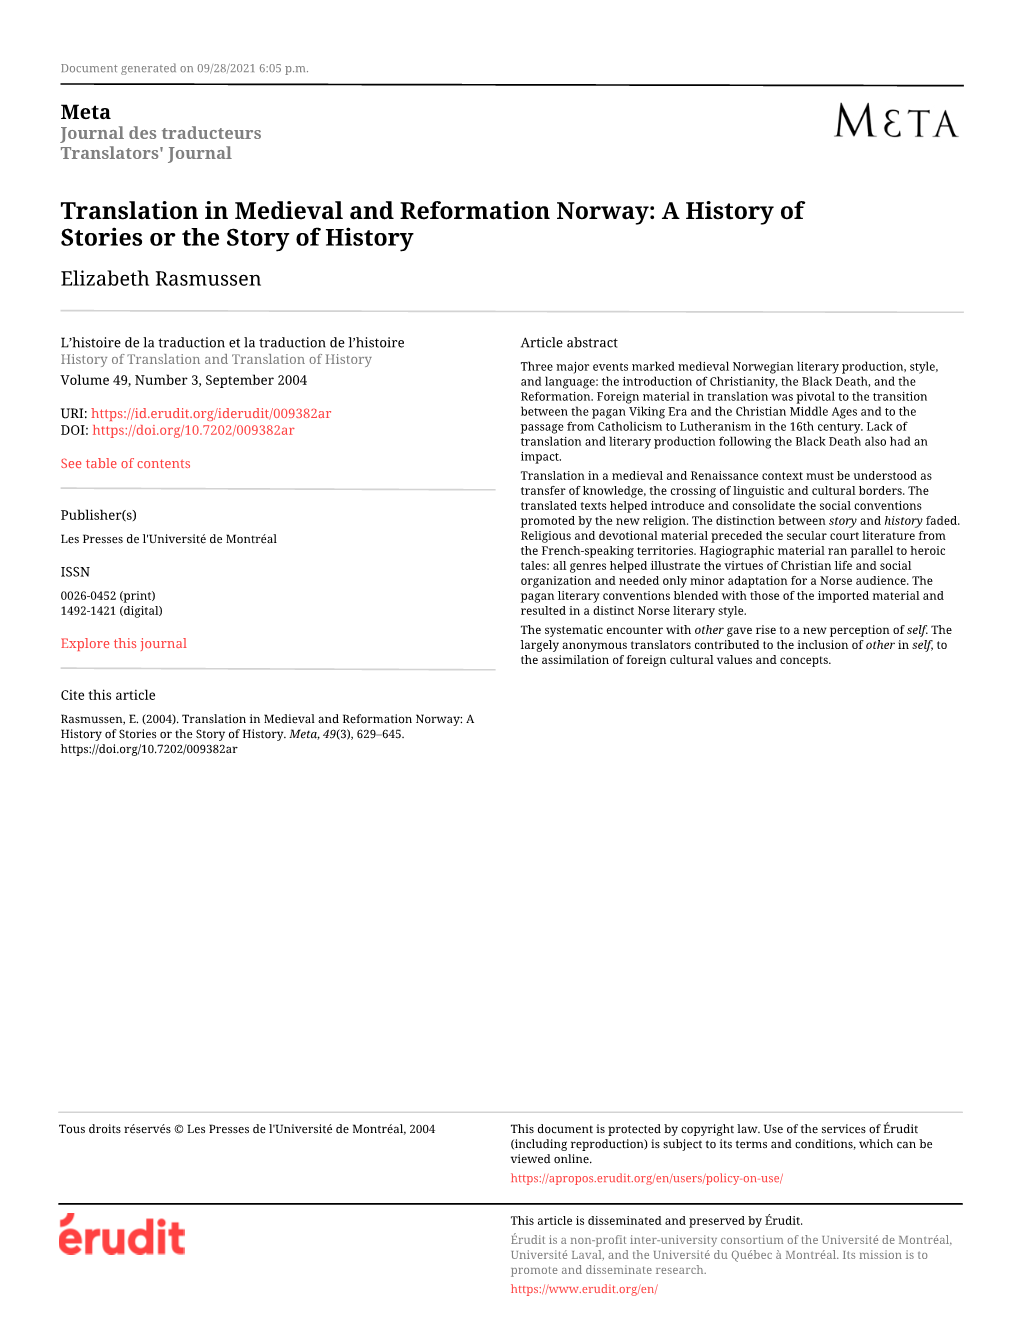 Translation in Medieval and Reformation Norway: a History of Stories Or the Story of History Elizabeth Rasmussen